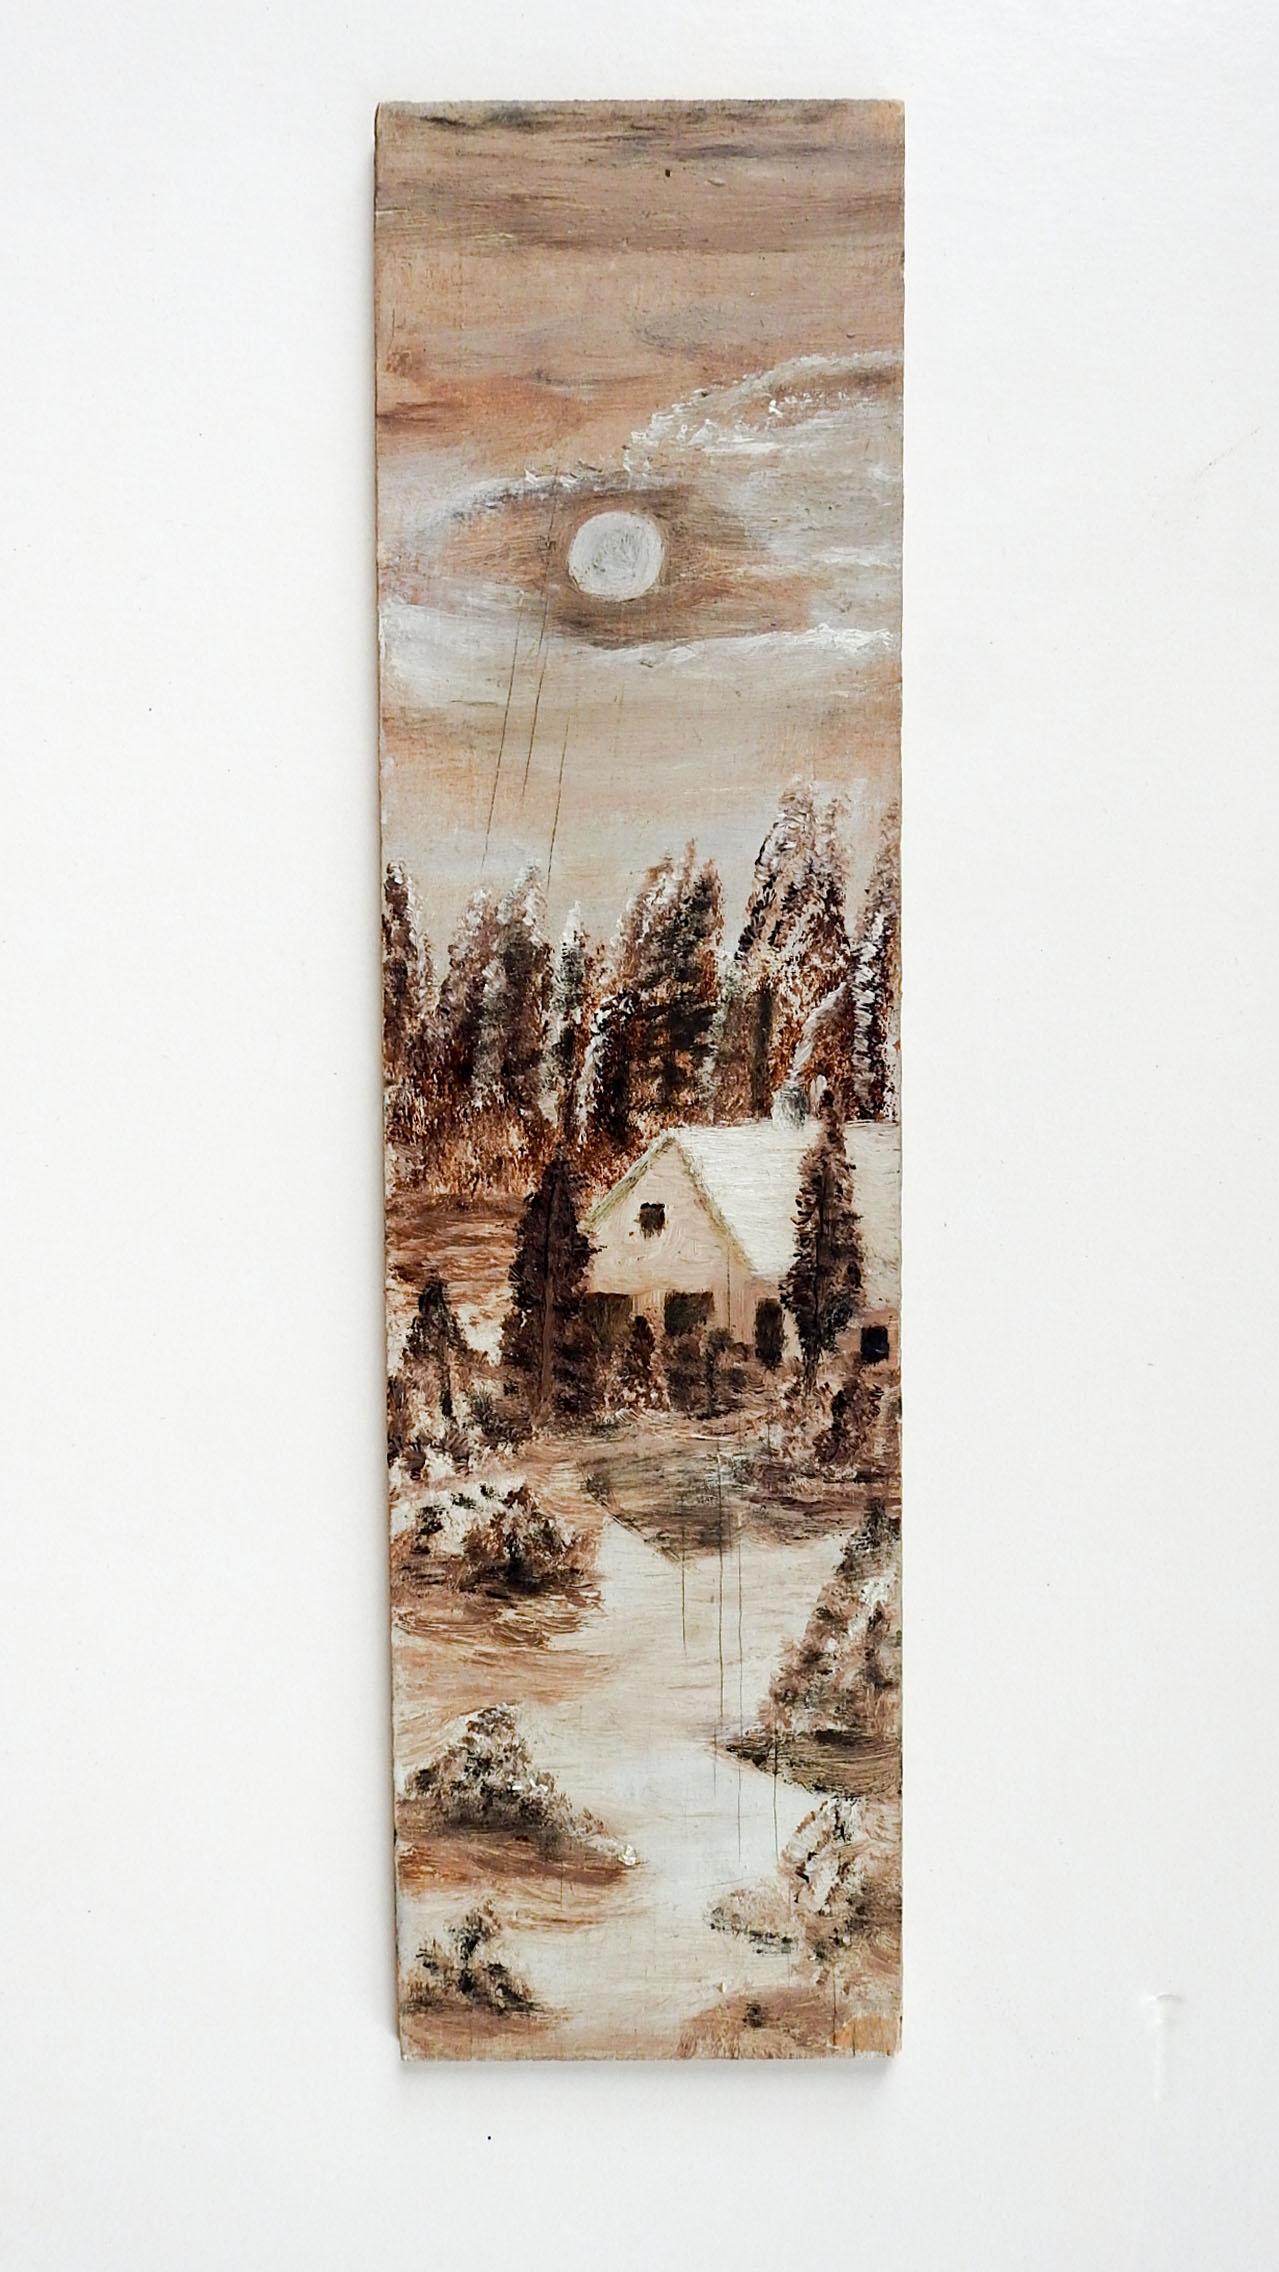 Vintage Folk Art Cabin in Winter Snow Landscape Long Format Painting In Good Condition For Sale In Seguin, TX